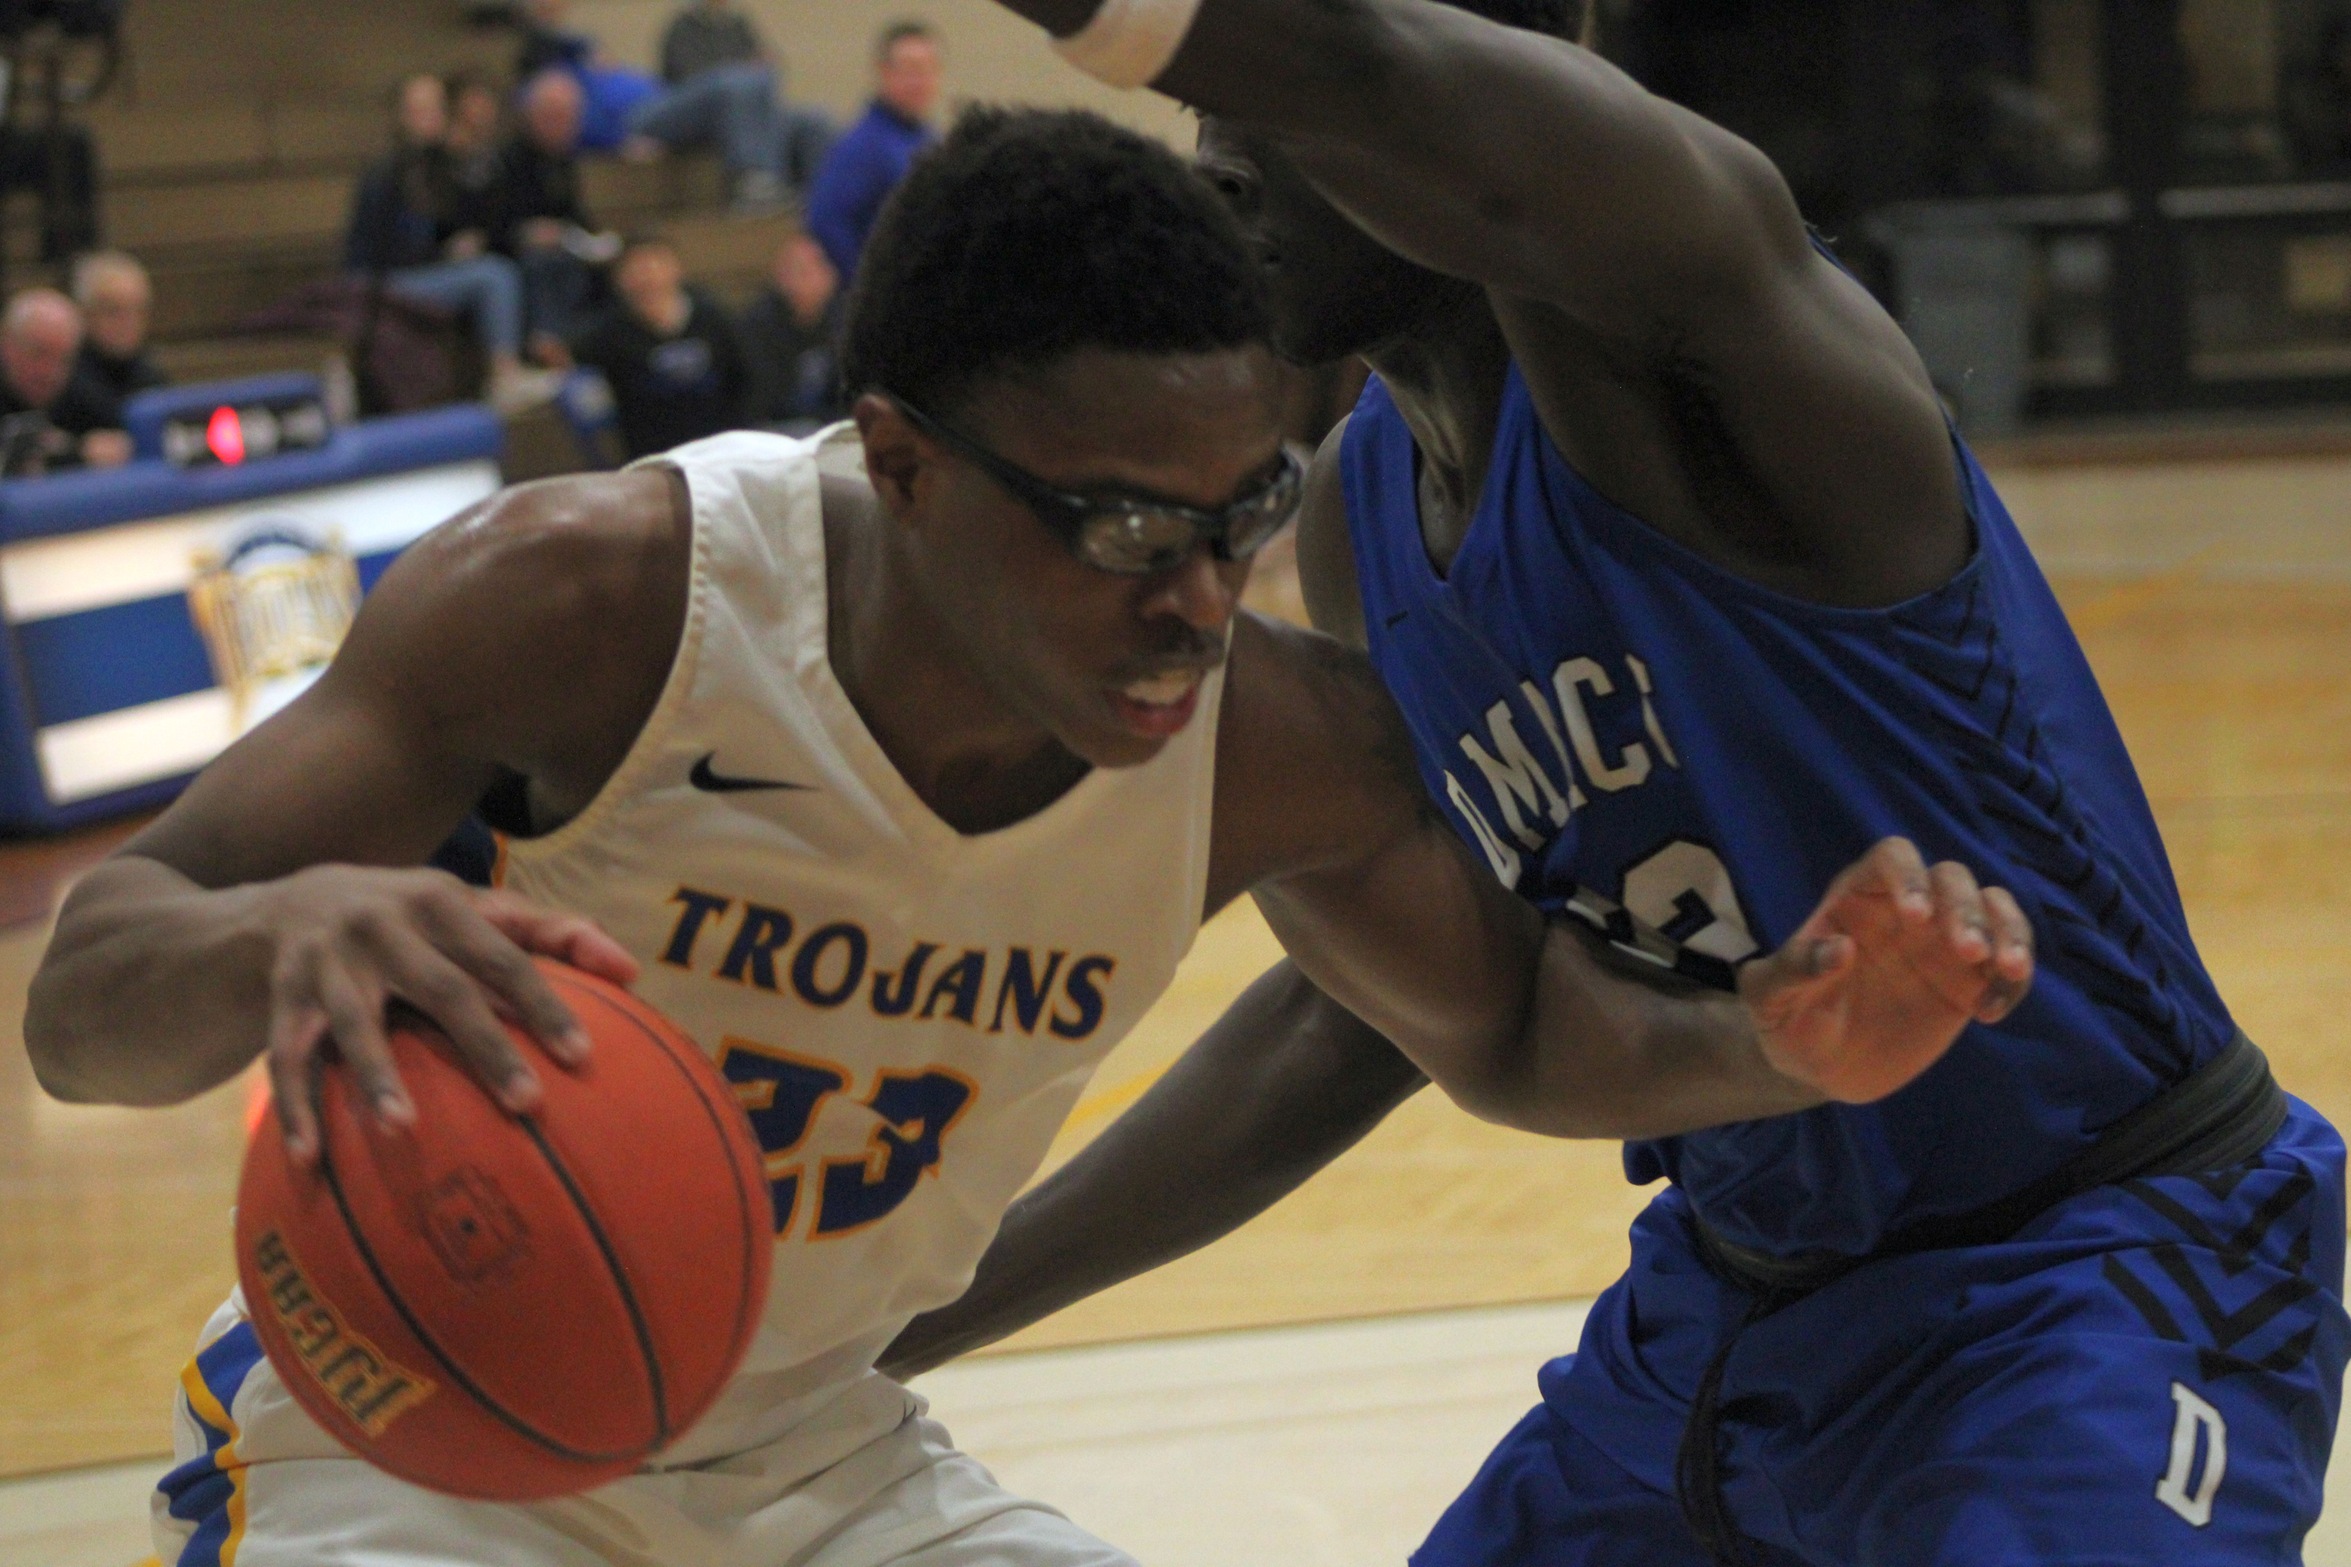 NIACC's Devon'dre Mayfield drives to the basket in Monday's game against DMACC.